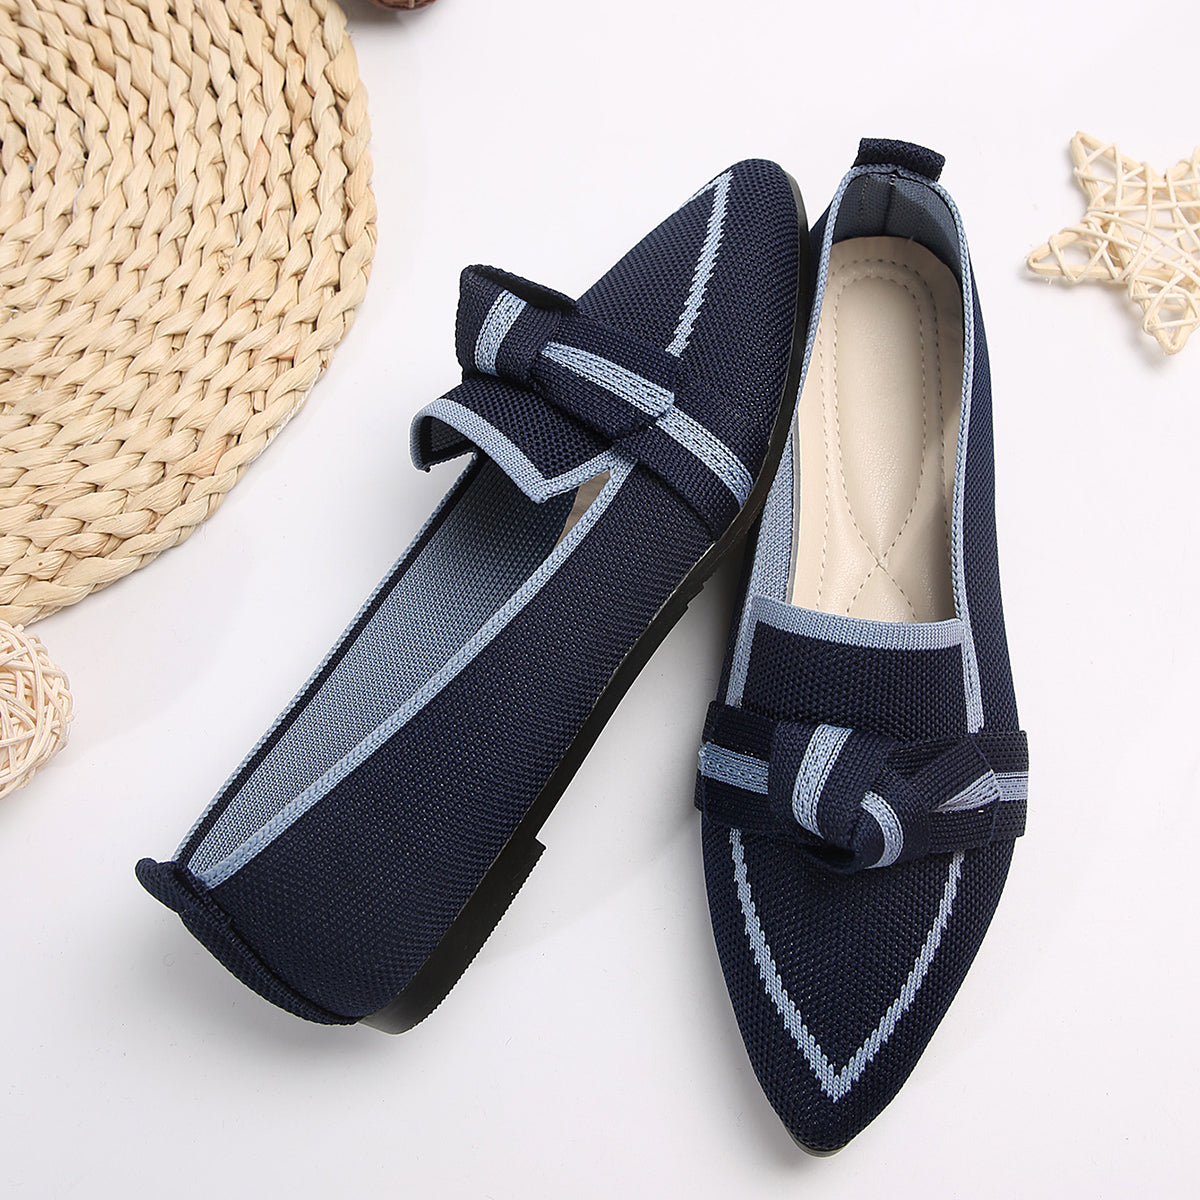 Pointed Knot Bow Top Ballet Flat Casual Loafer Contrast Color Slip-on Shoes